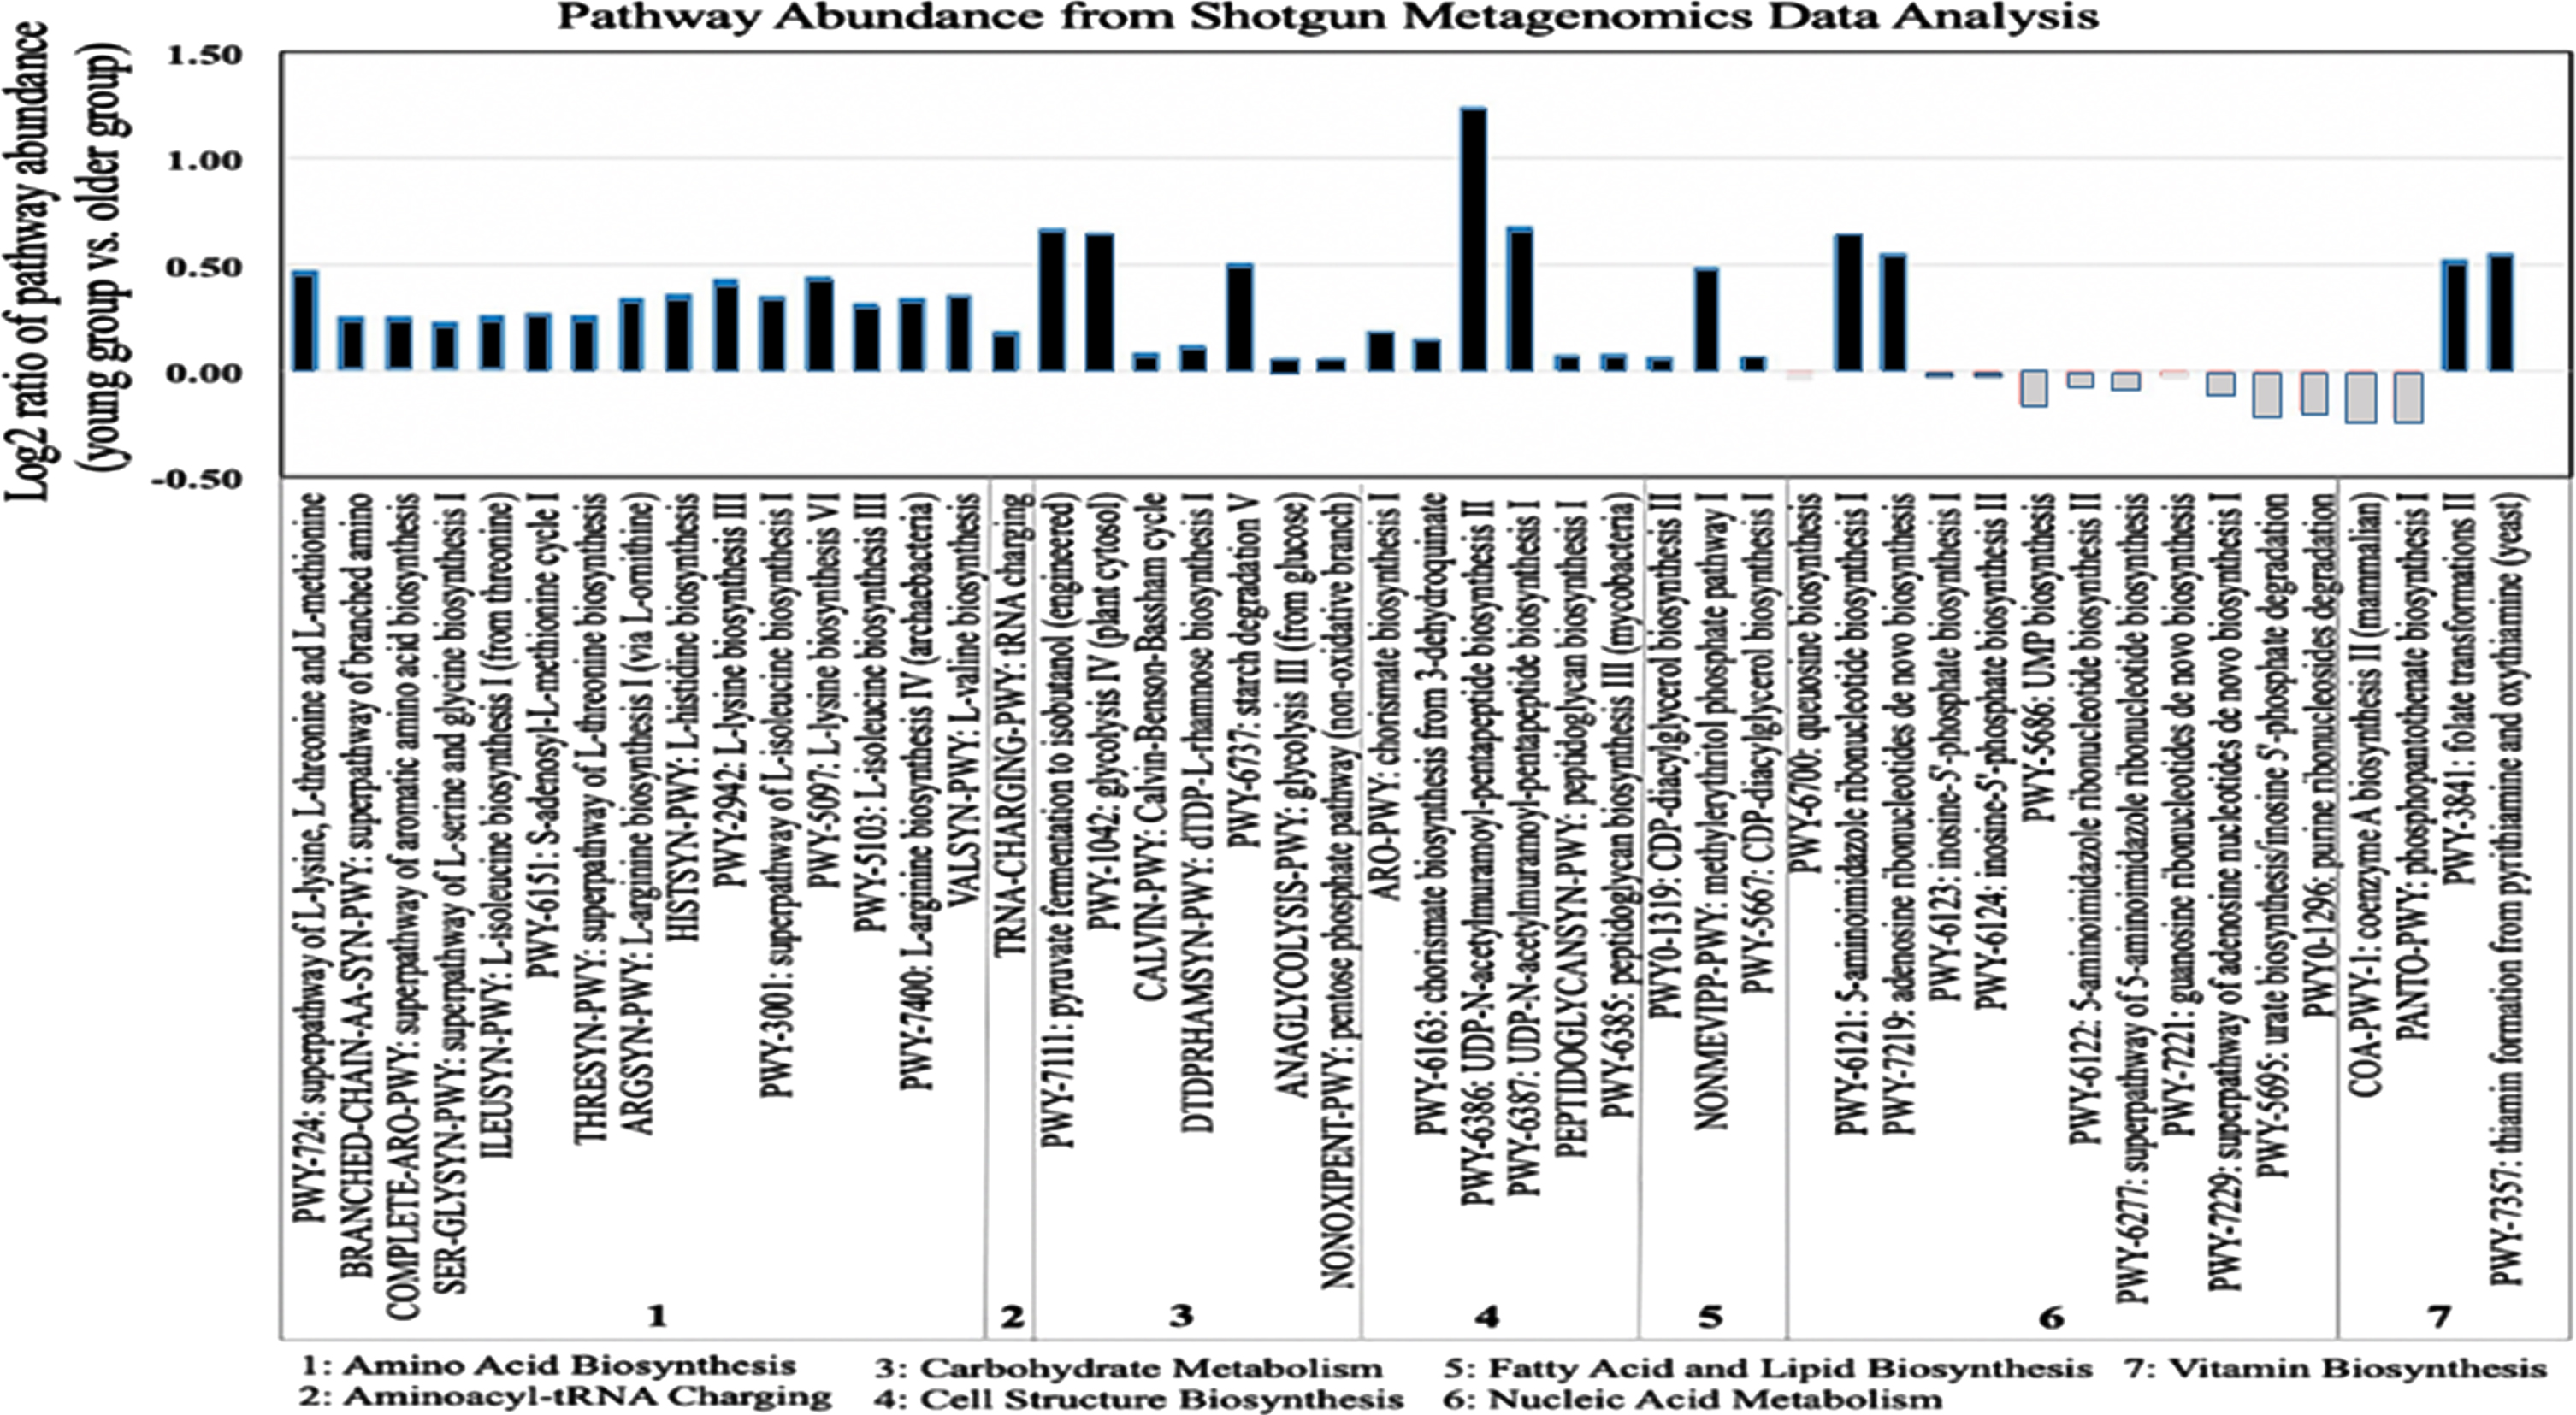 Functional profiling of young and older adulthood microbiota based on shotgun metagenomics. Derived from whole metagenome shotgun data, the bar plot shows log2 ratios of the average pathway abundance for young and older subjects of each pathway. Older and young pathways that are more abundant are represented in white and black, respectively.